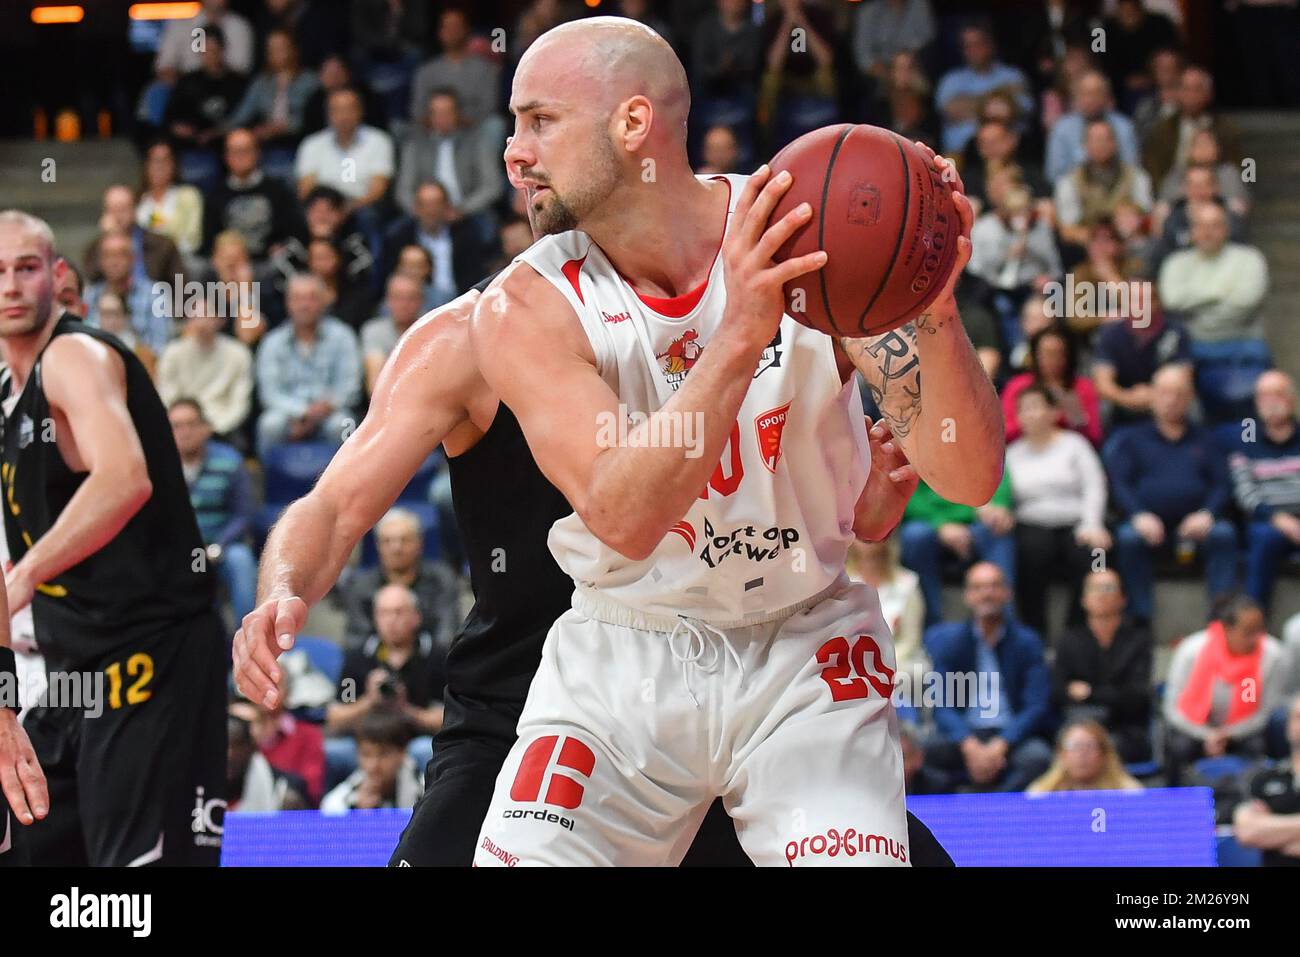 Antwerp's Mike Smith pictured in action during the basketball game between  Port of Antwerp Giants and Oostende, on day 33 of the EuroMillions League  basket competition, on Sunday 07 May 2017 in